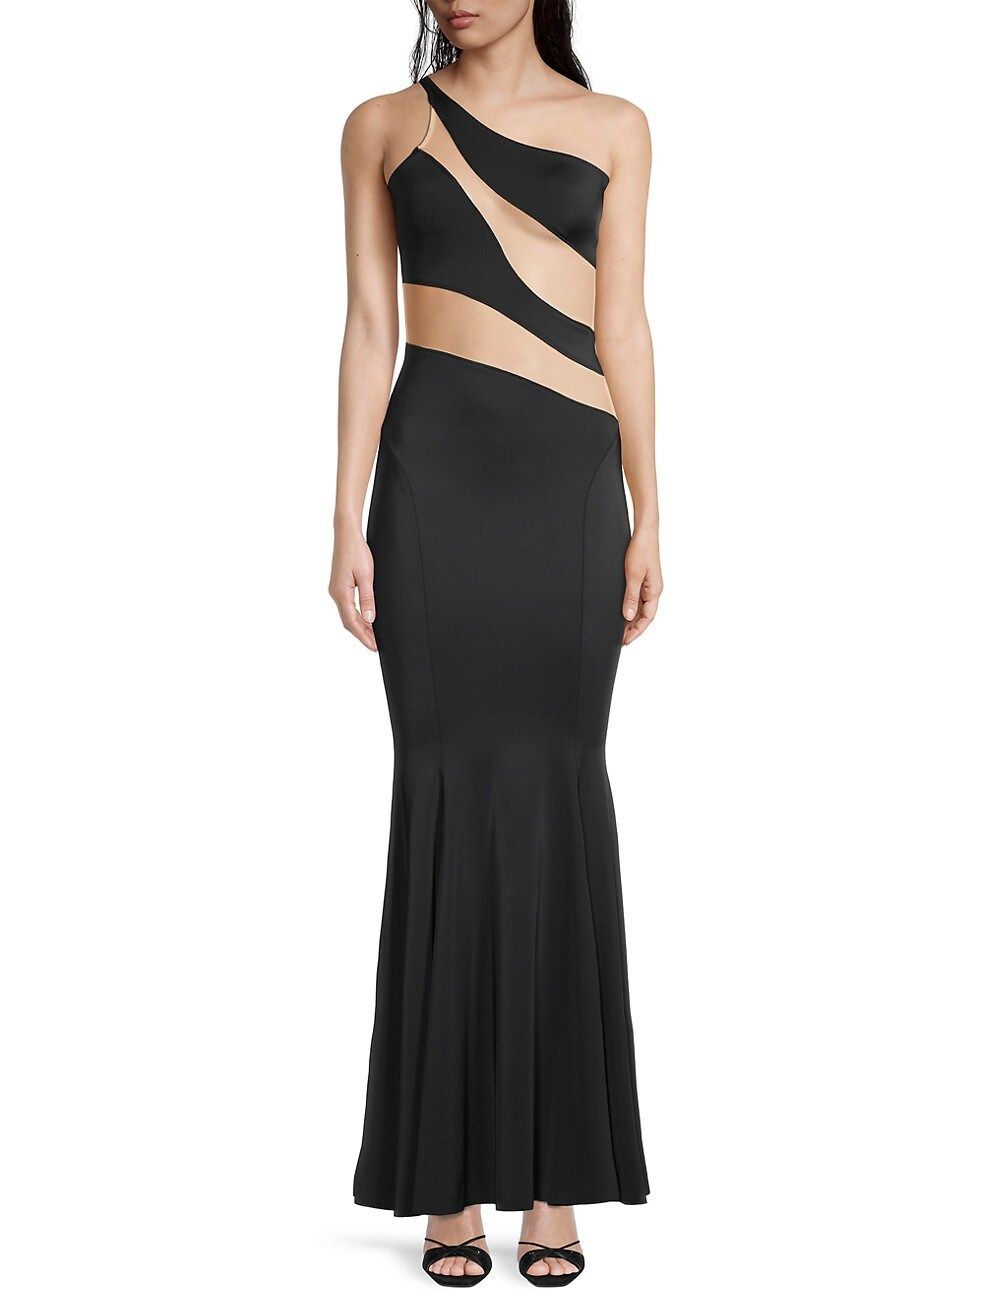 Norma Kamali Snake Mesh One-Shoulder Fishtail Gown | Saks Fifth Avenue